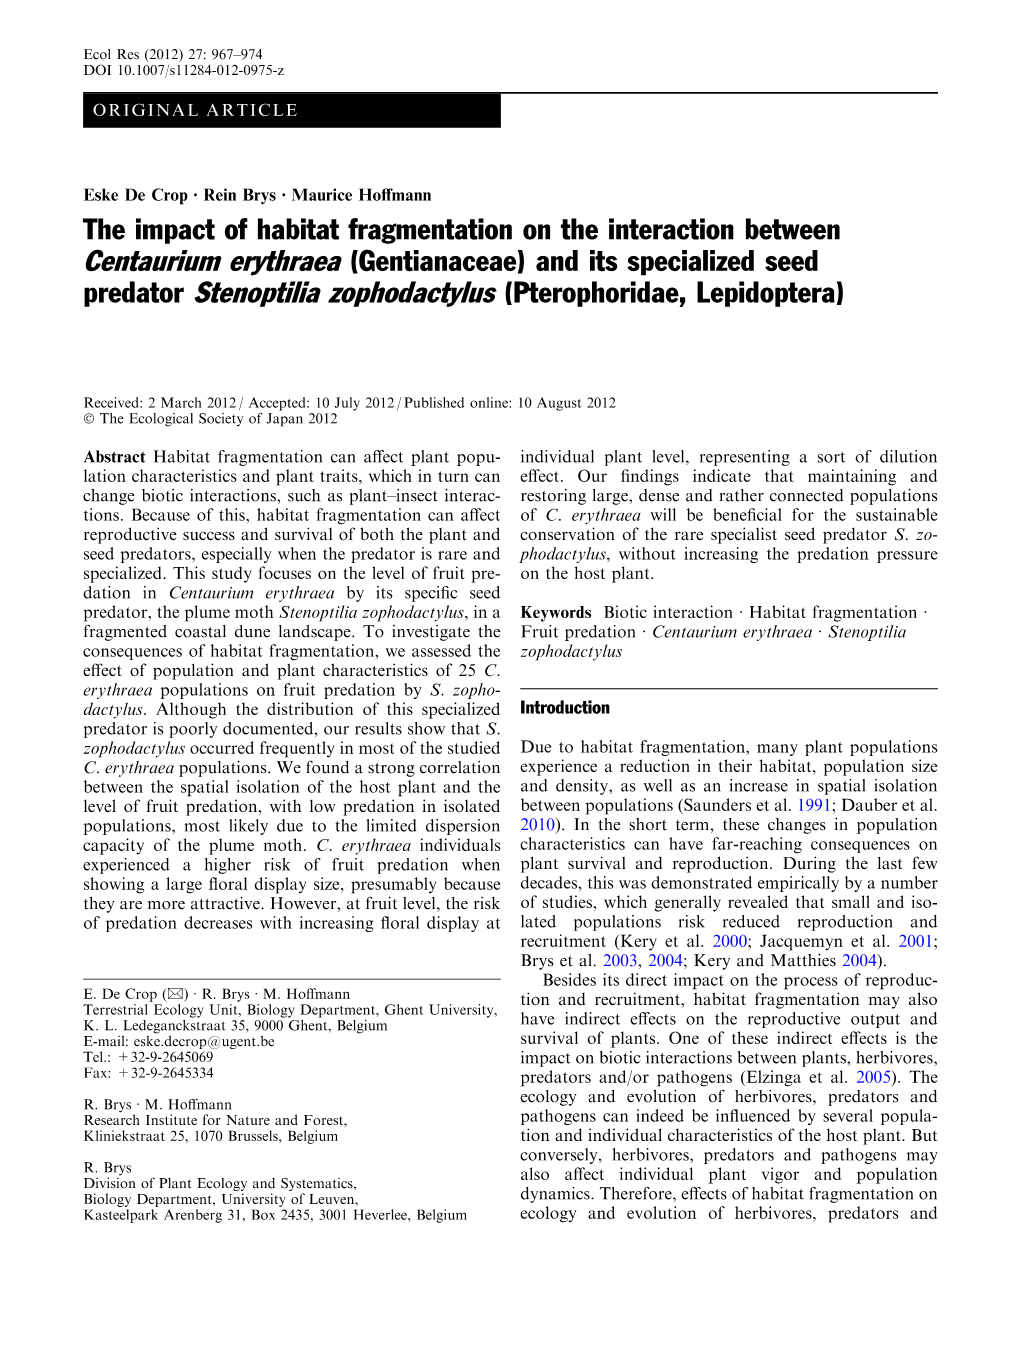 The Impact of Habitat Fragmentation on the Interaction Between